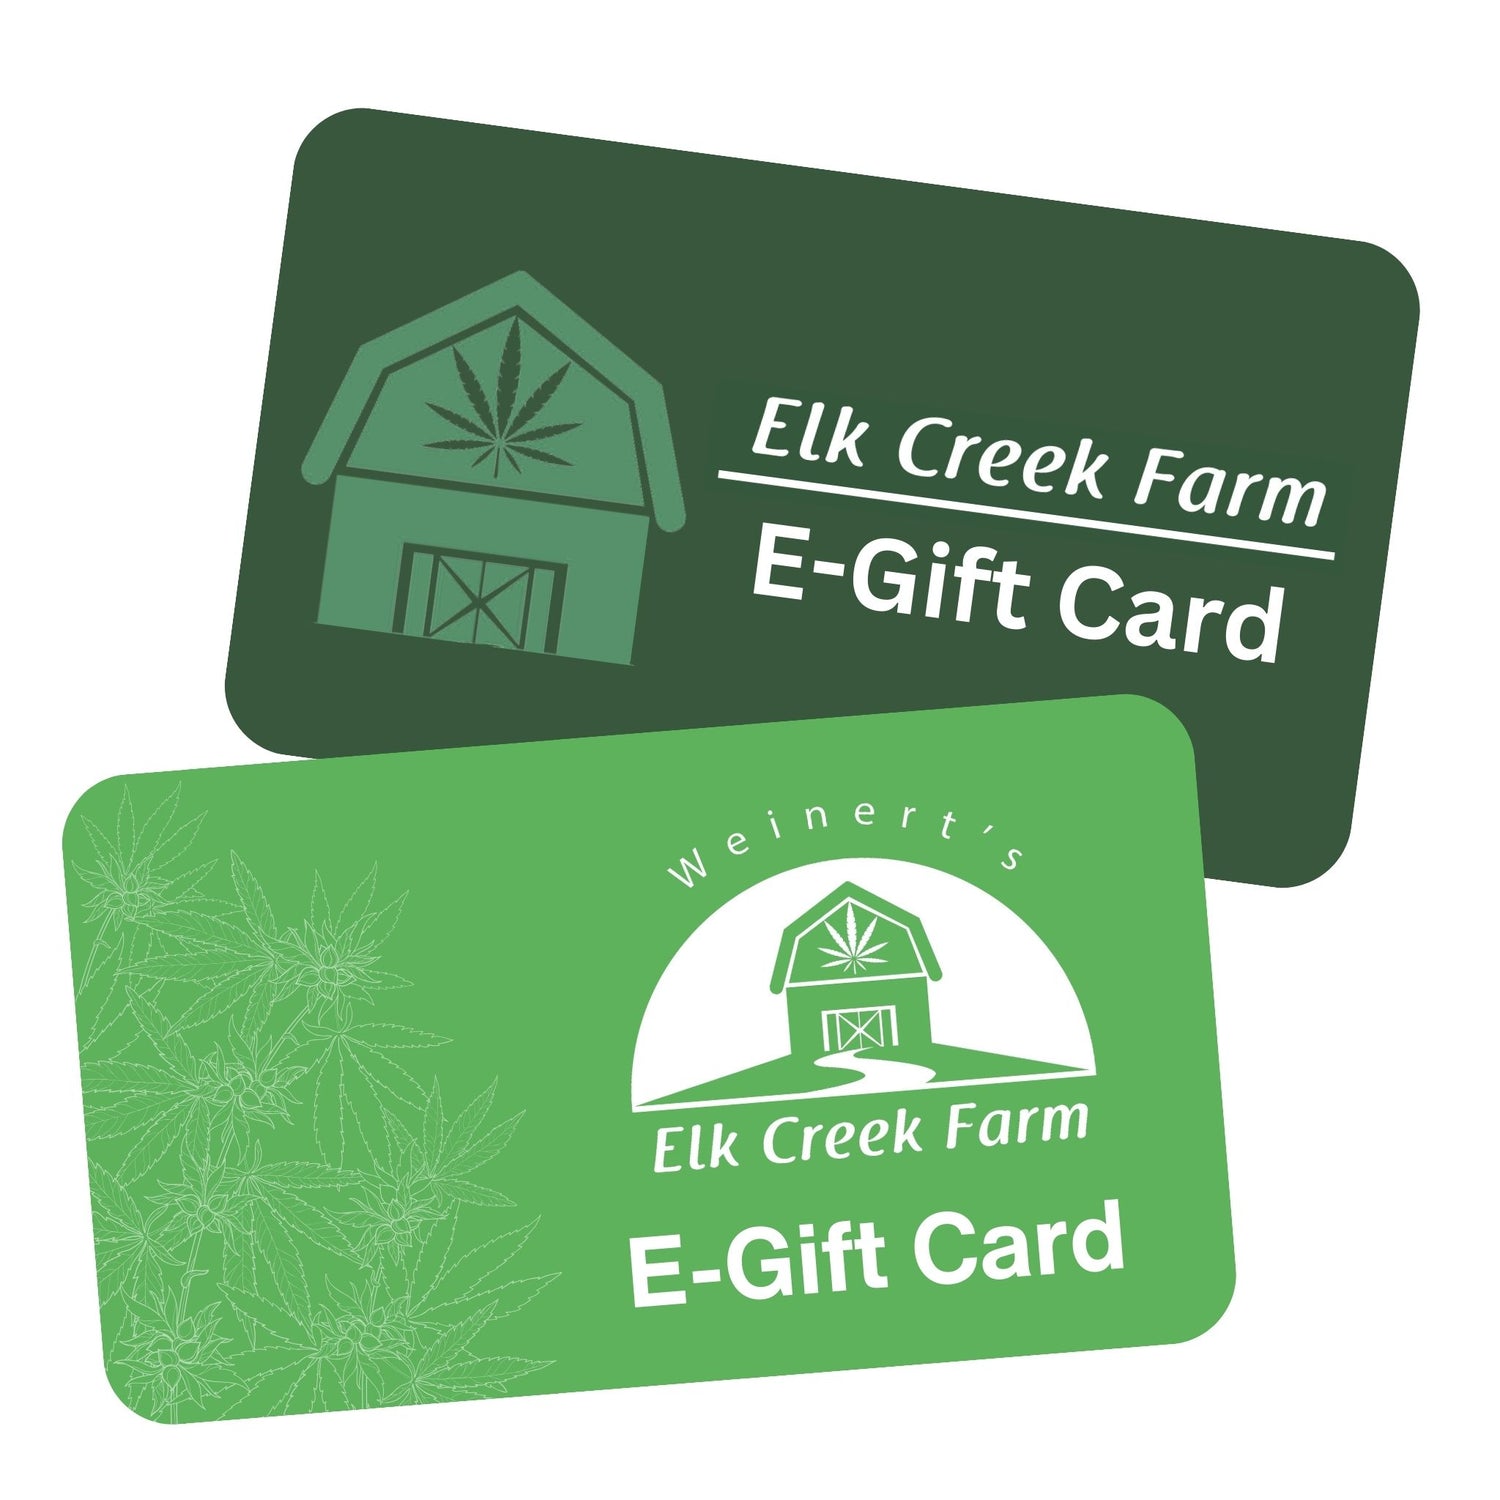 Two E-Gift Cards for the Weinert's Elk Creek Farmstead